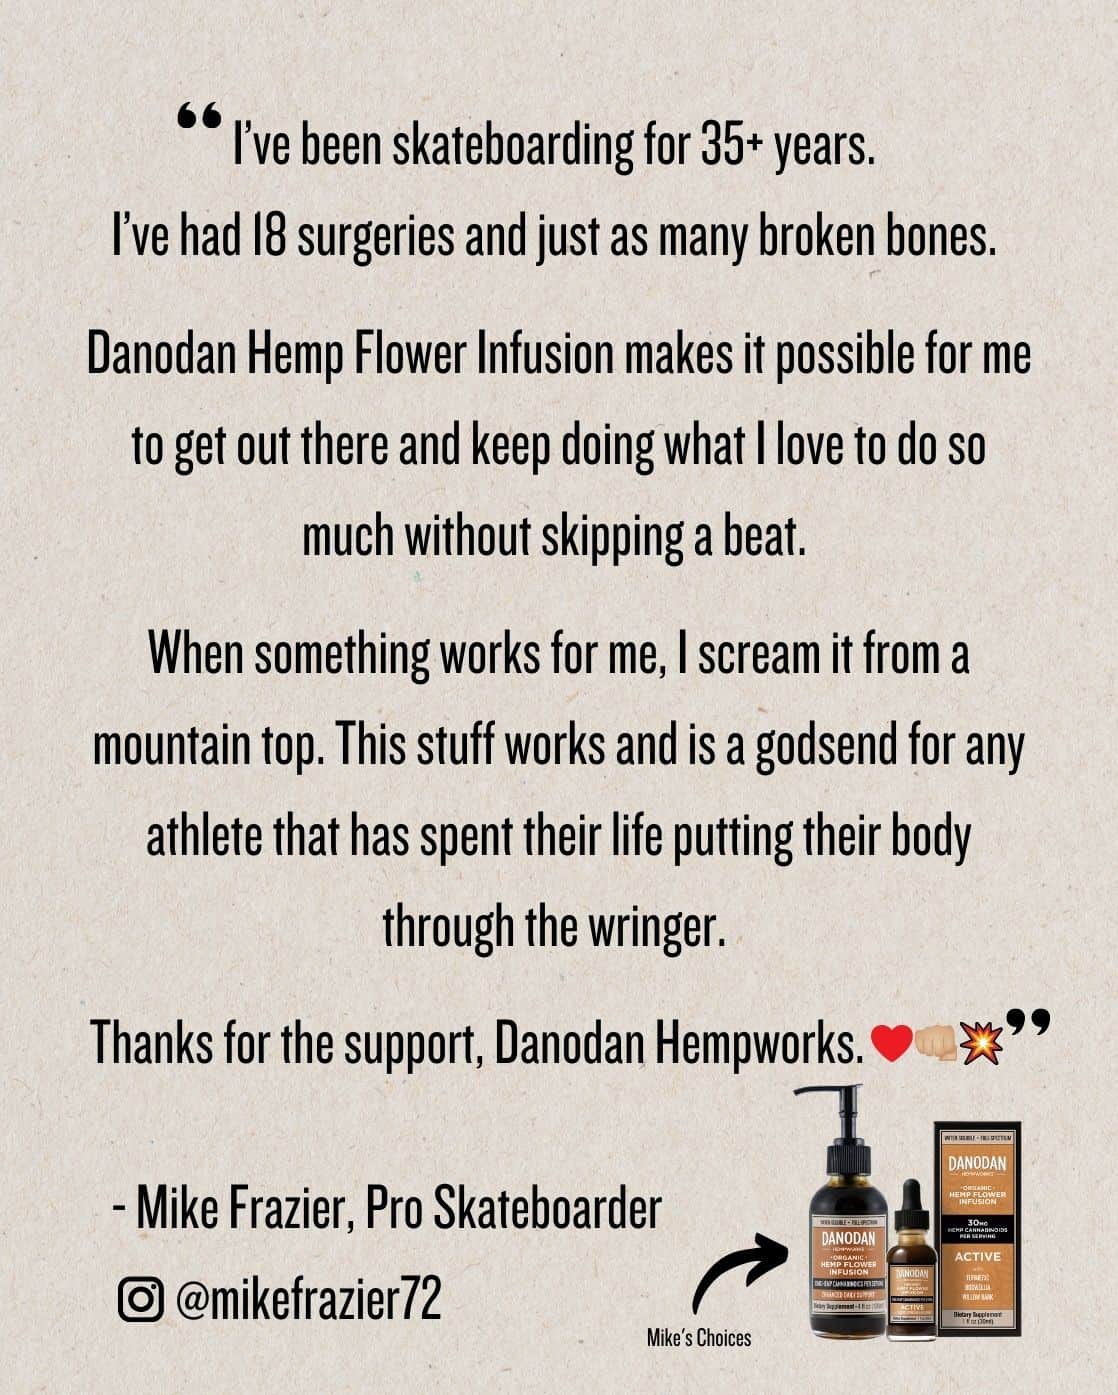 I’ve been skateboarding for 35+ years. I’ve had 18 surgeries and just as many broken bones. Danodan Hemp Flower Infusion makes it possible for me to get out there and keep doing what I love to do so much without skipping a beat. When something works for me, I scream it from a mountain top. This stuff works and is a godsend for any athlete that has spent their life putting their body through the wringer. Thanks for the support, Danodan Hempworks. - Mike Frazier, Pro Skateboarder